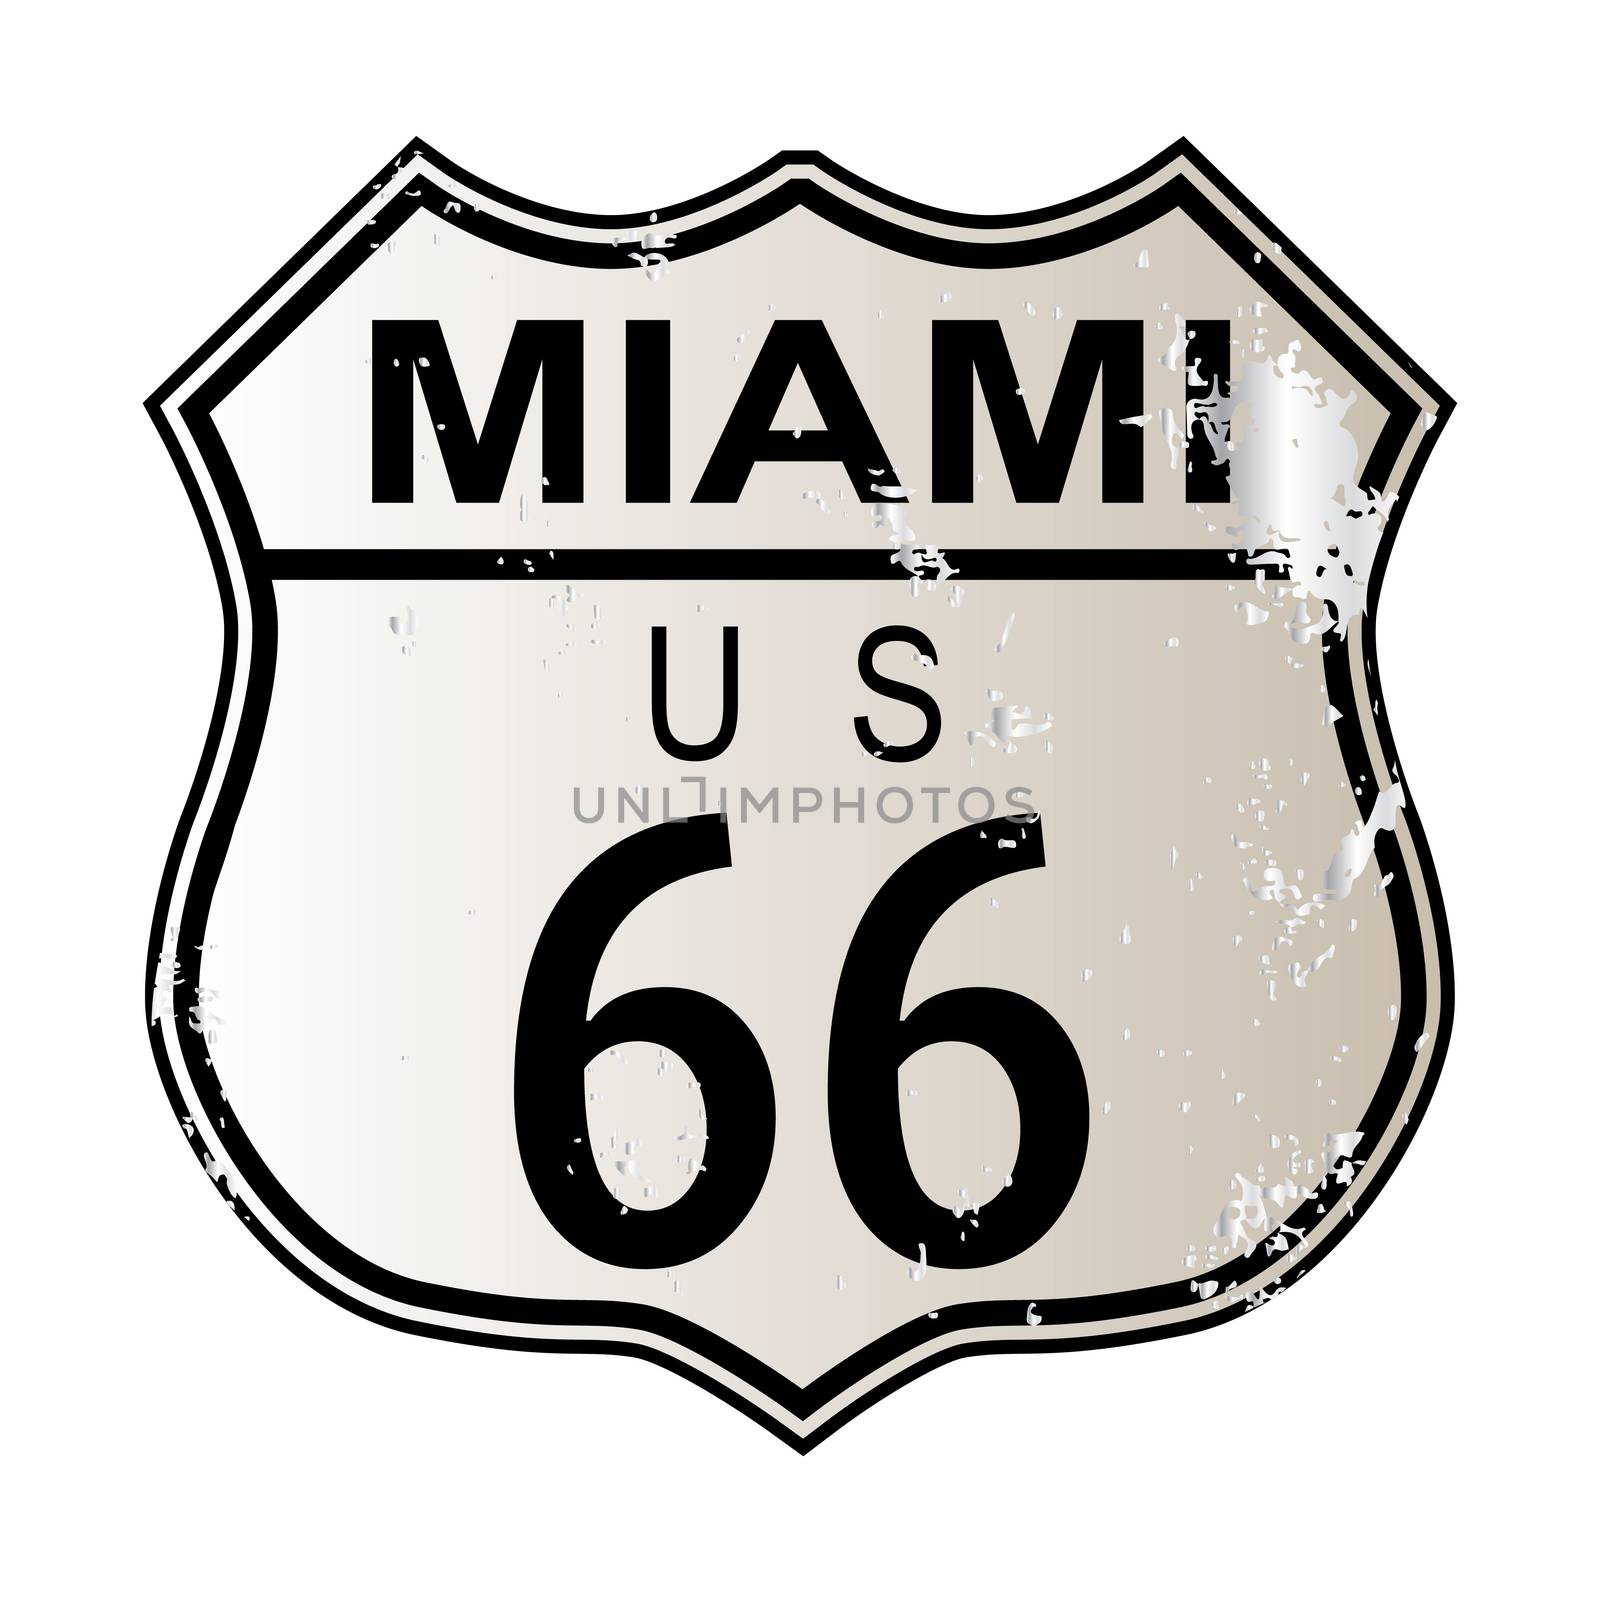 Miami Route 66 traffic sign over a white background and the legend ROUTE US 66